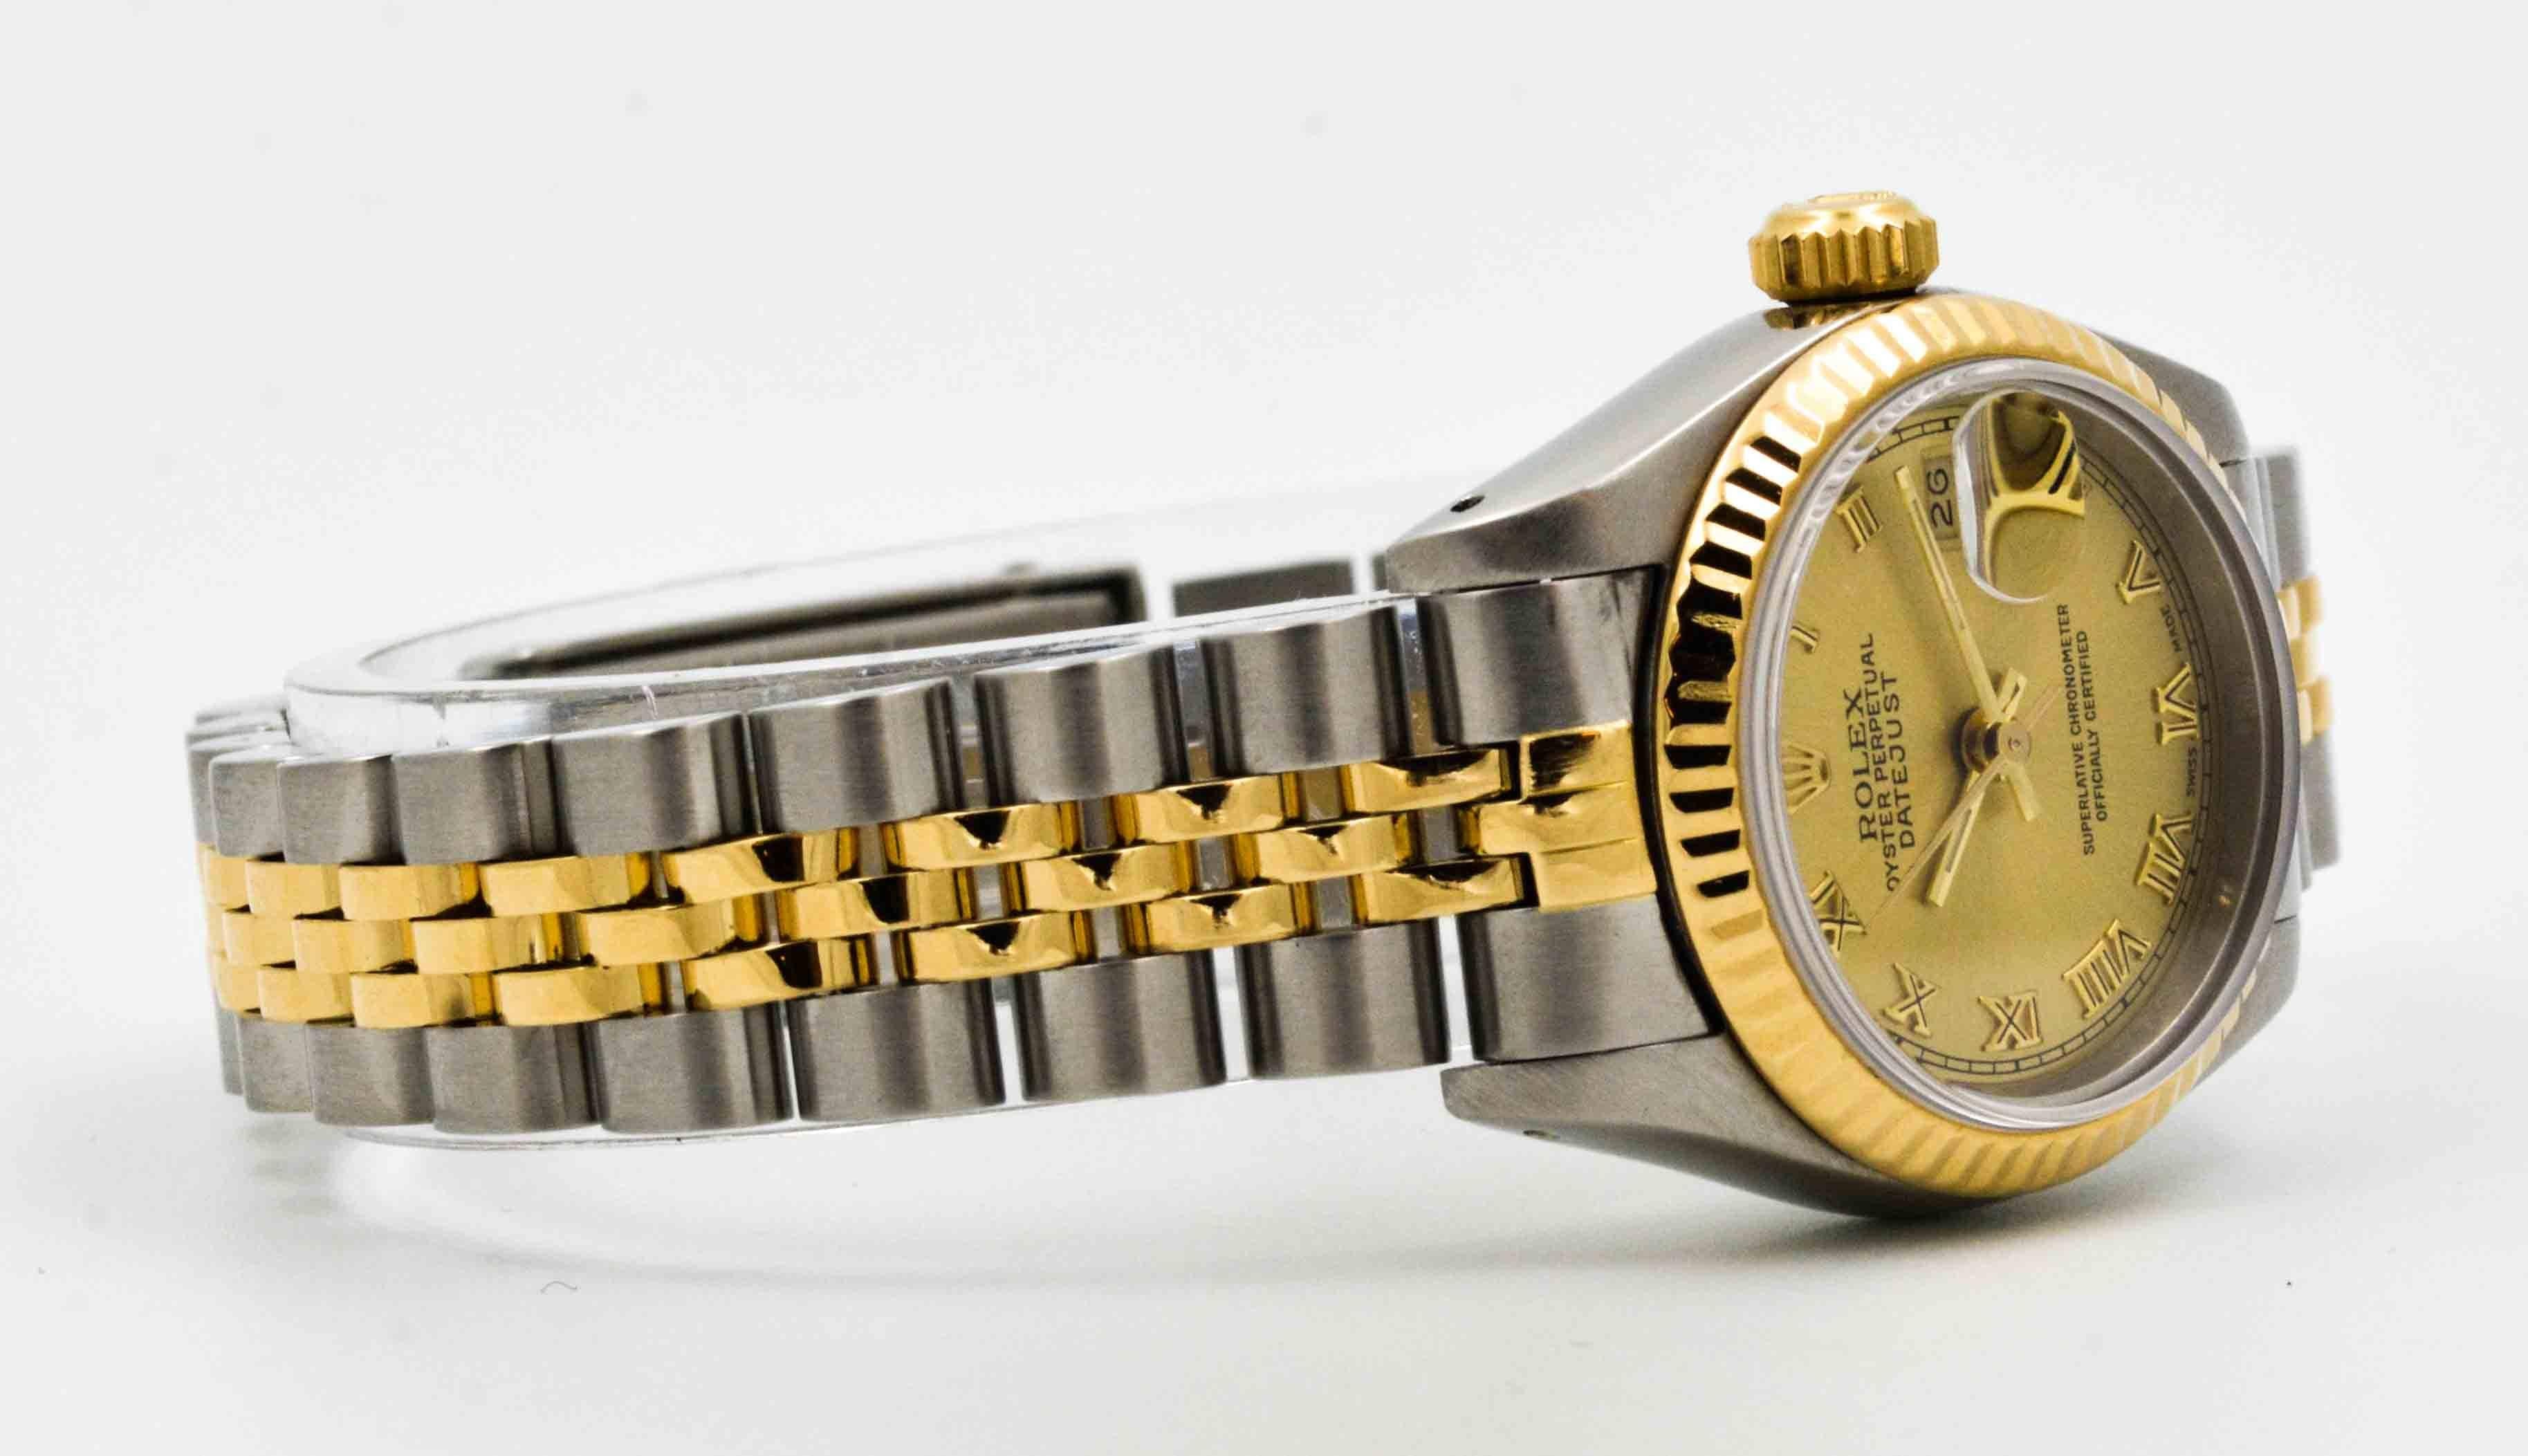 The world famous watch company, Rolex, designed this classic 26 mm ladies watch to set off your distinguished style. This DateJust wrist watch of stainless steel, champagne dial and Roman numerals, has a vibrant 18 karat yellow gold fluted bezel.